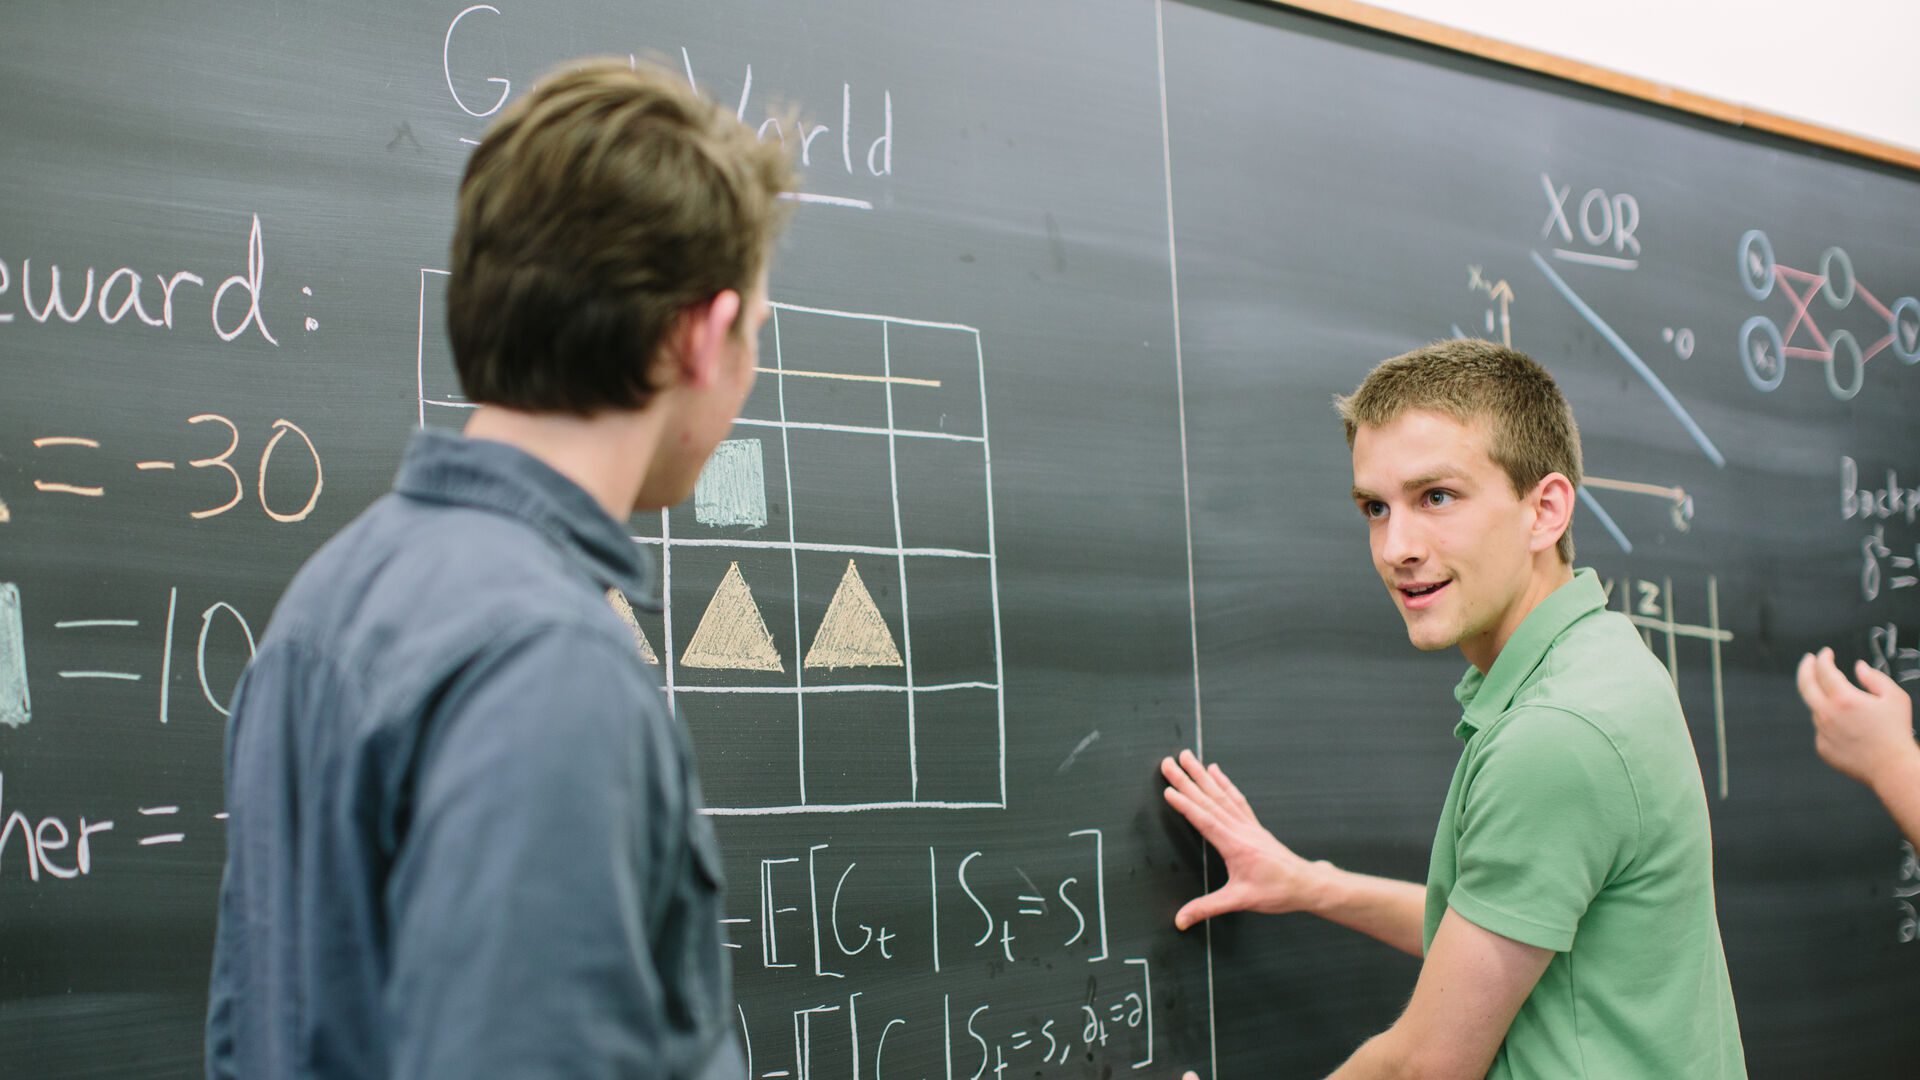 Two Houghton computer science students working through problem at the chalkboard.